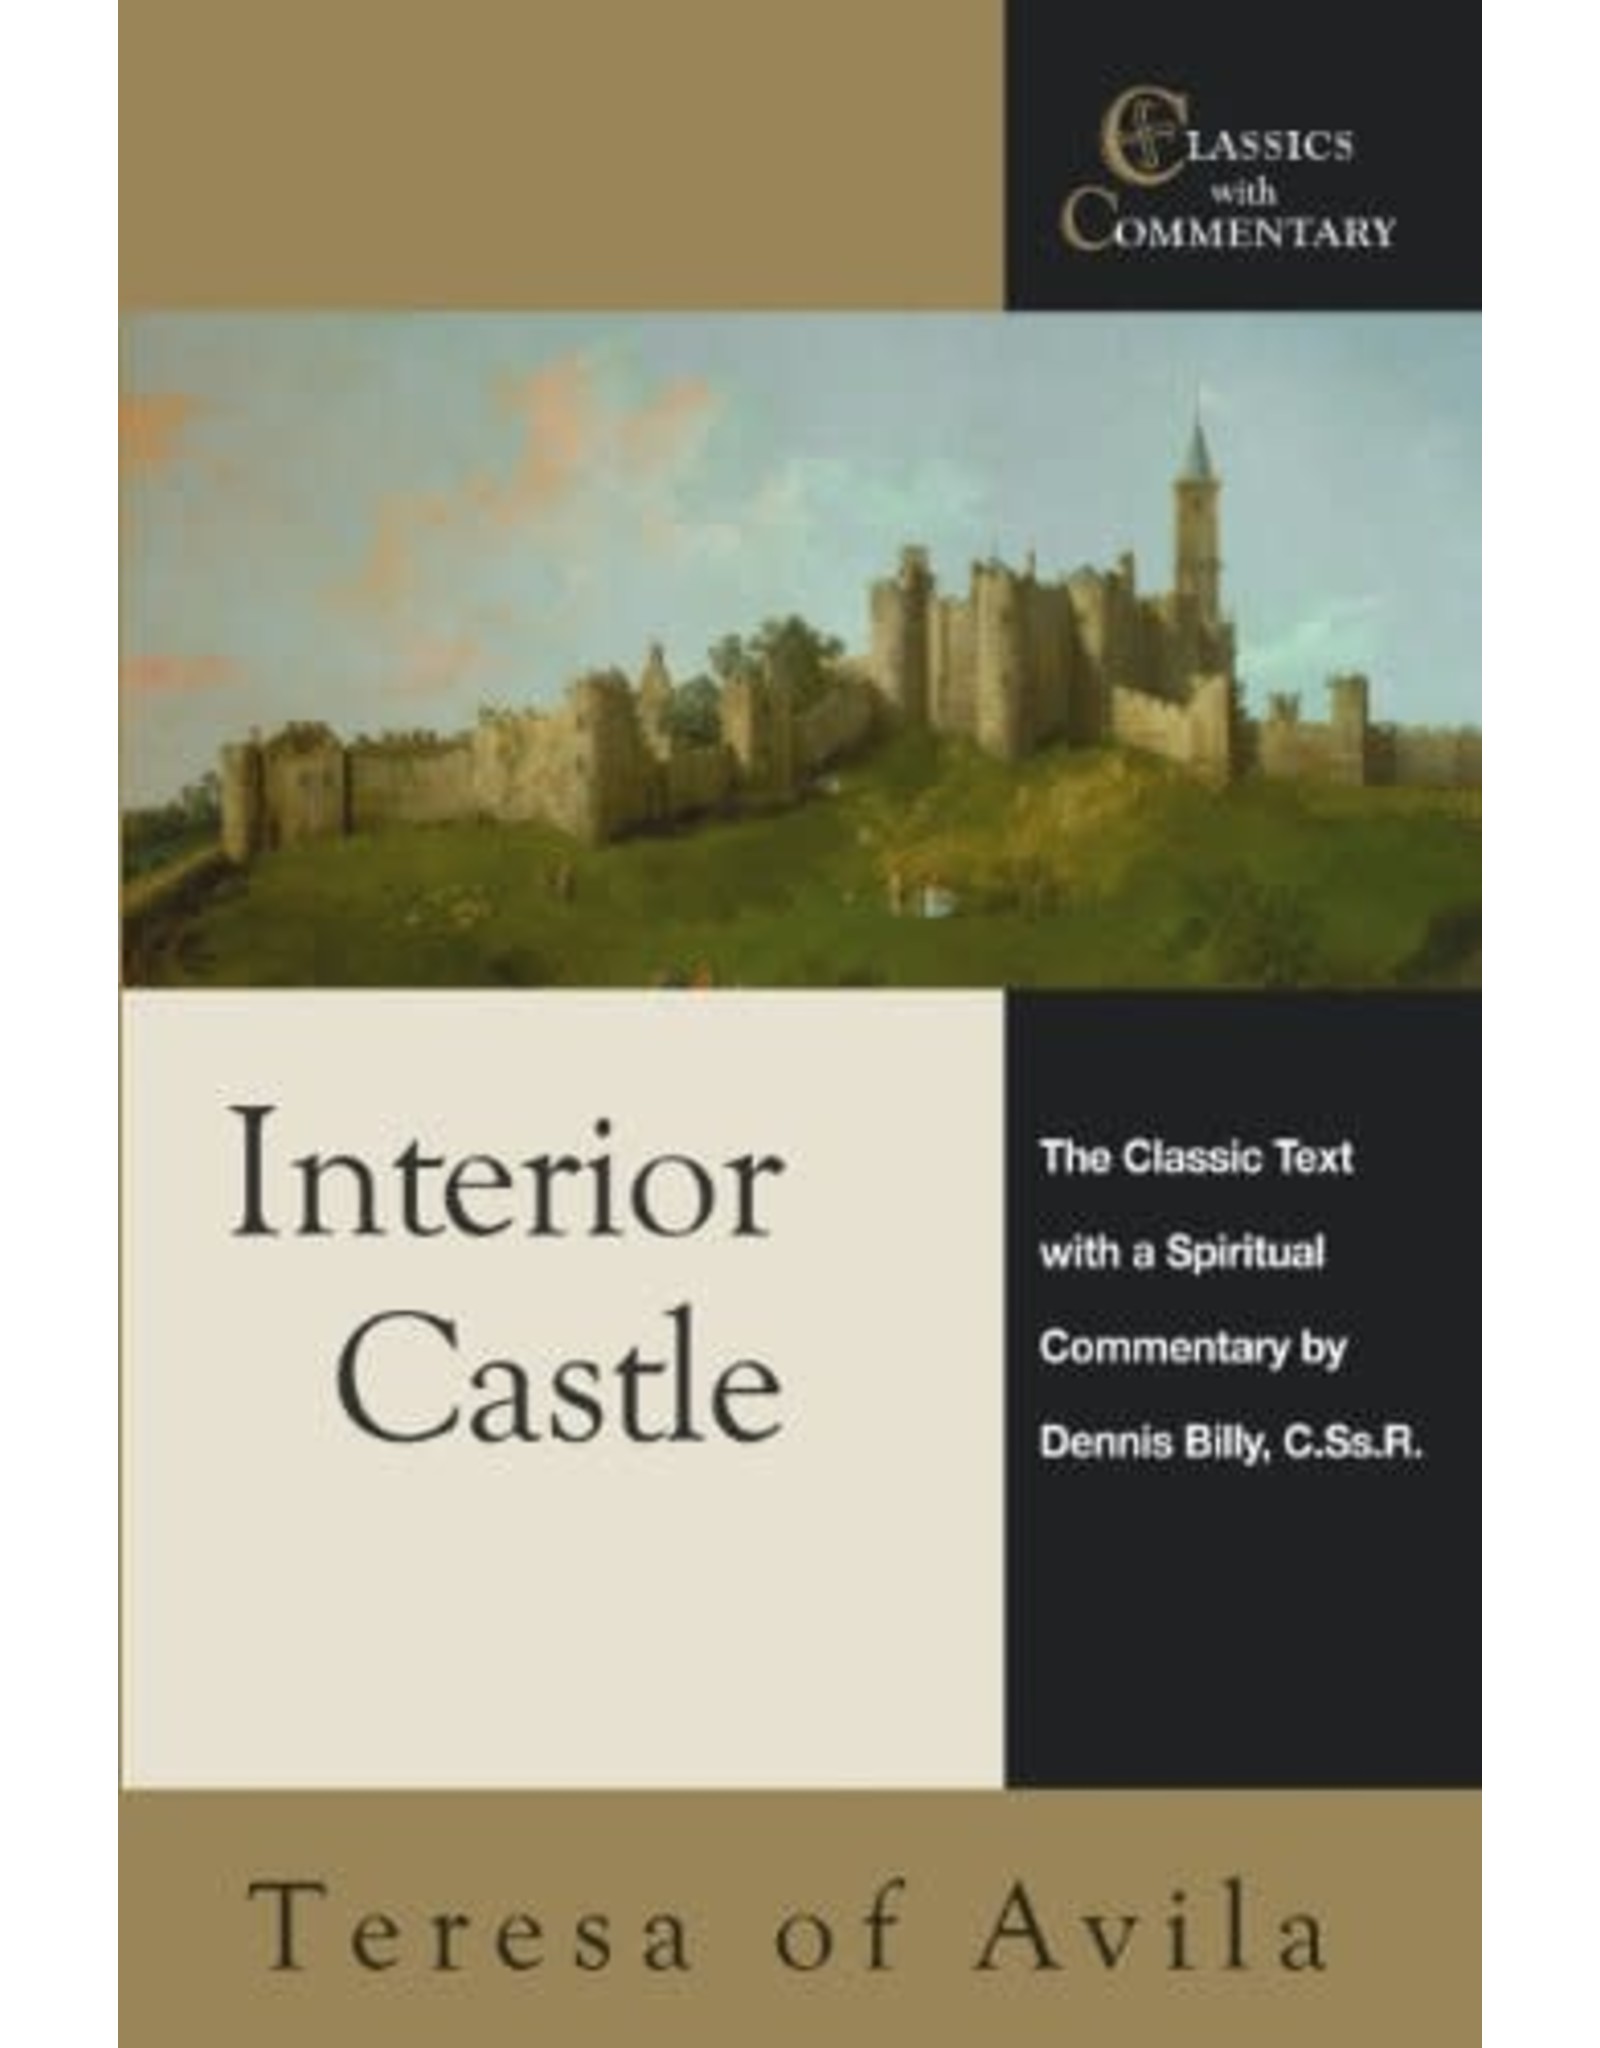 Ave Maria Press The Interior Castle by Teresa of Avila with Commentary by Dennis Billy, C.Ss.R (Classics with Commentary Paperback Edition)